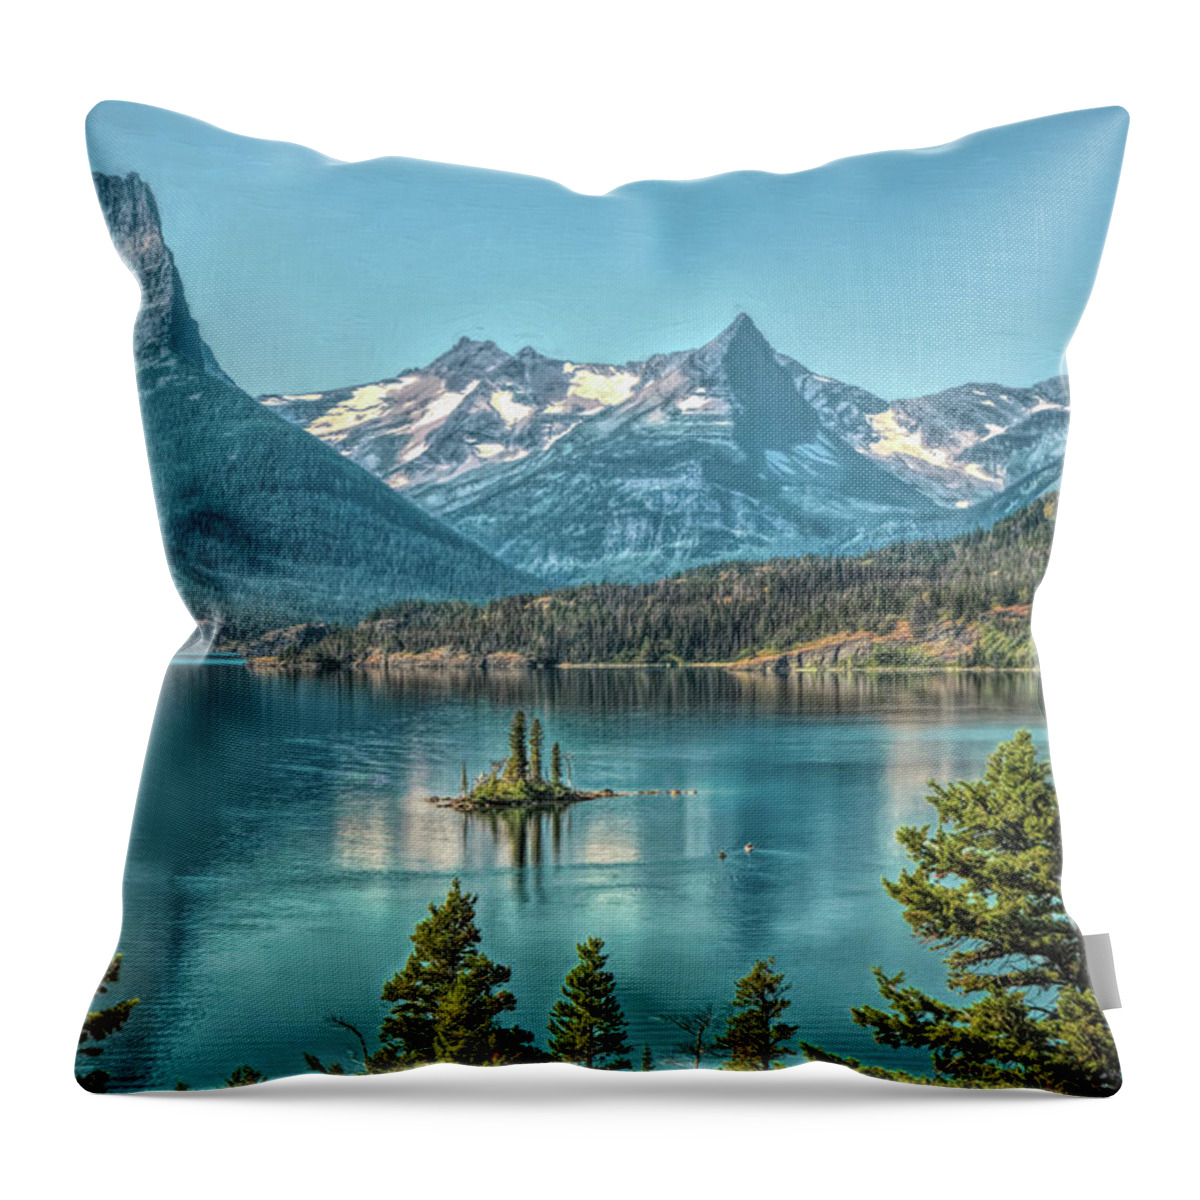 Landscape Throw Pillow featuring the photograph St Mary Lake by John M Bailey